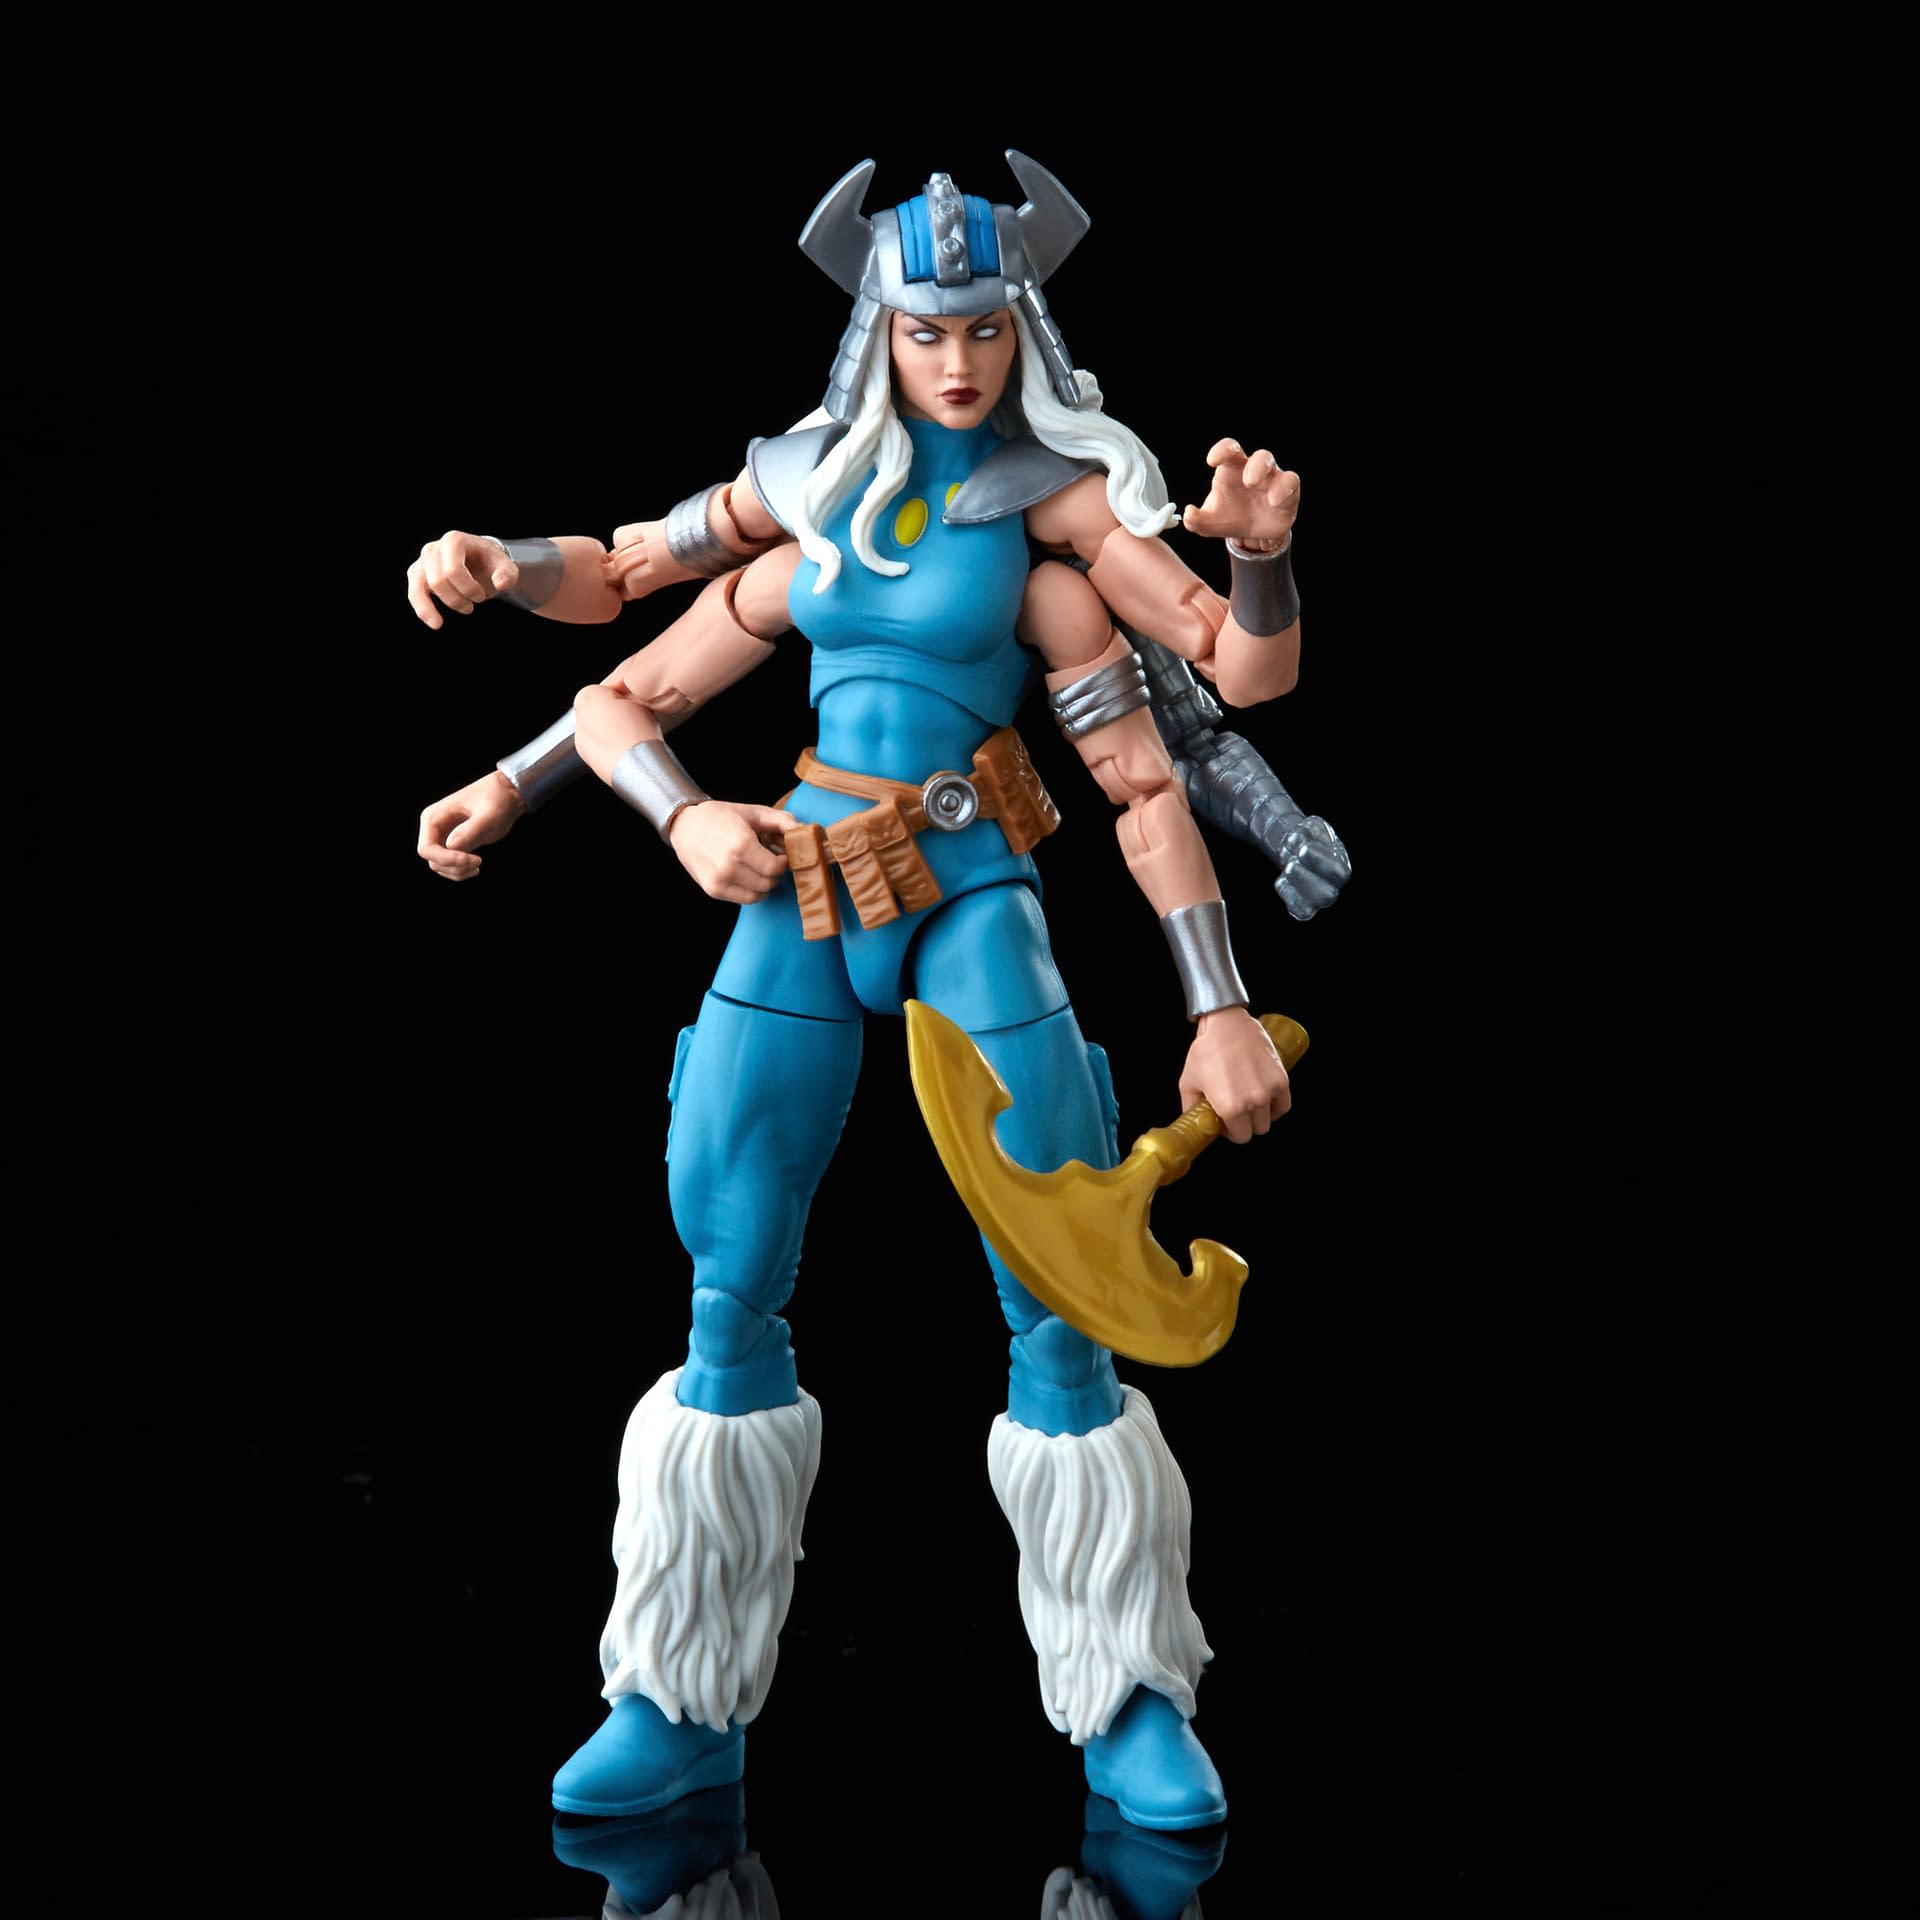 X-Men's Spiral and Her Six Arms Arrive with Marvel Legends